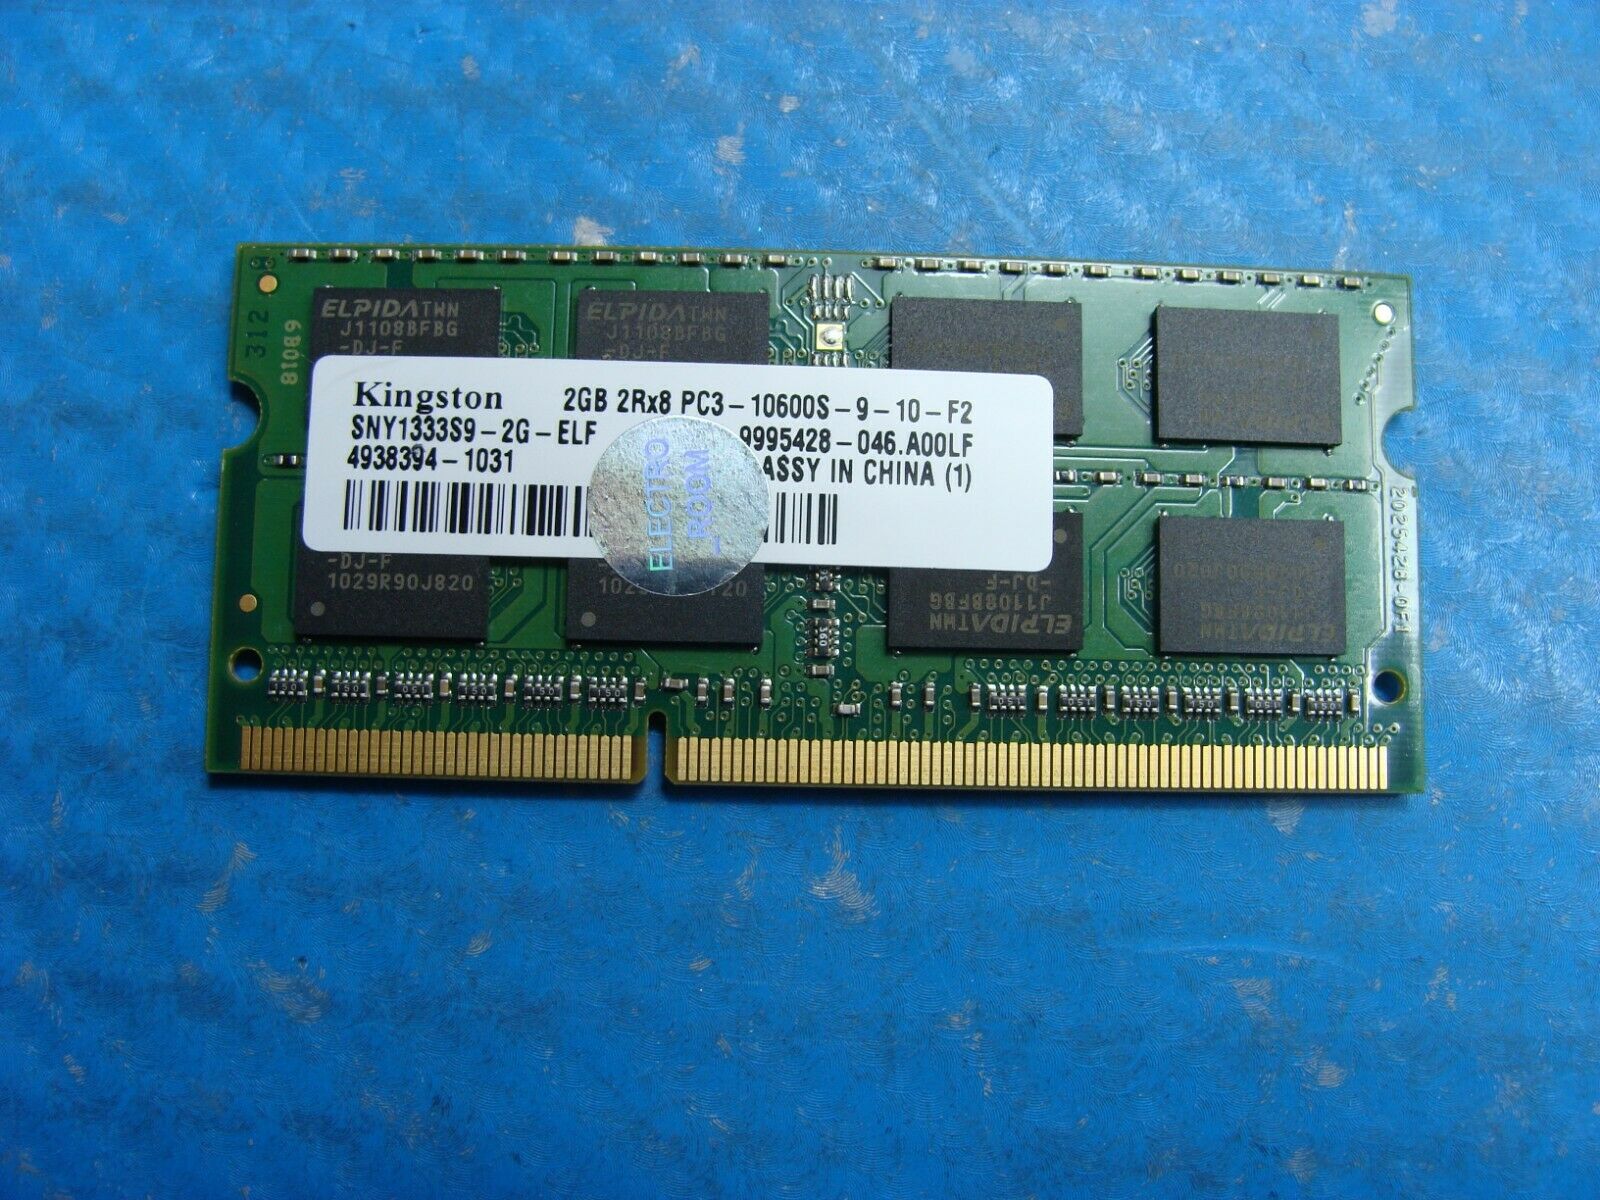 Sony VPCEB33FM Laptop Kingston 2GB Memory PC3-10600S-9-10-F2 9995428-046.A00LF - Laptop Parts - Buy Authentic Computer Parts - Top Seller Ebay